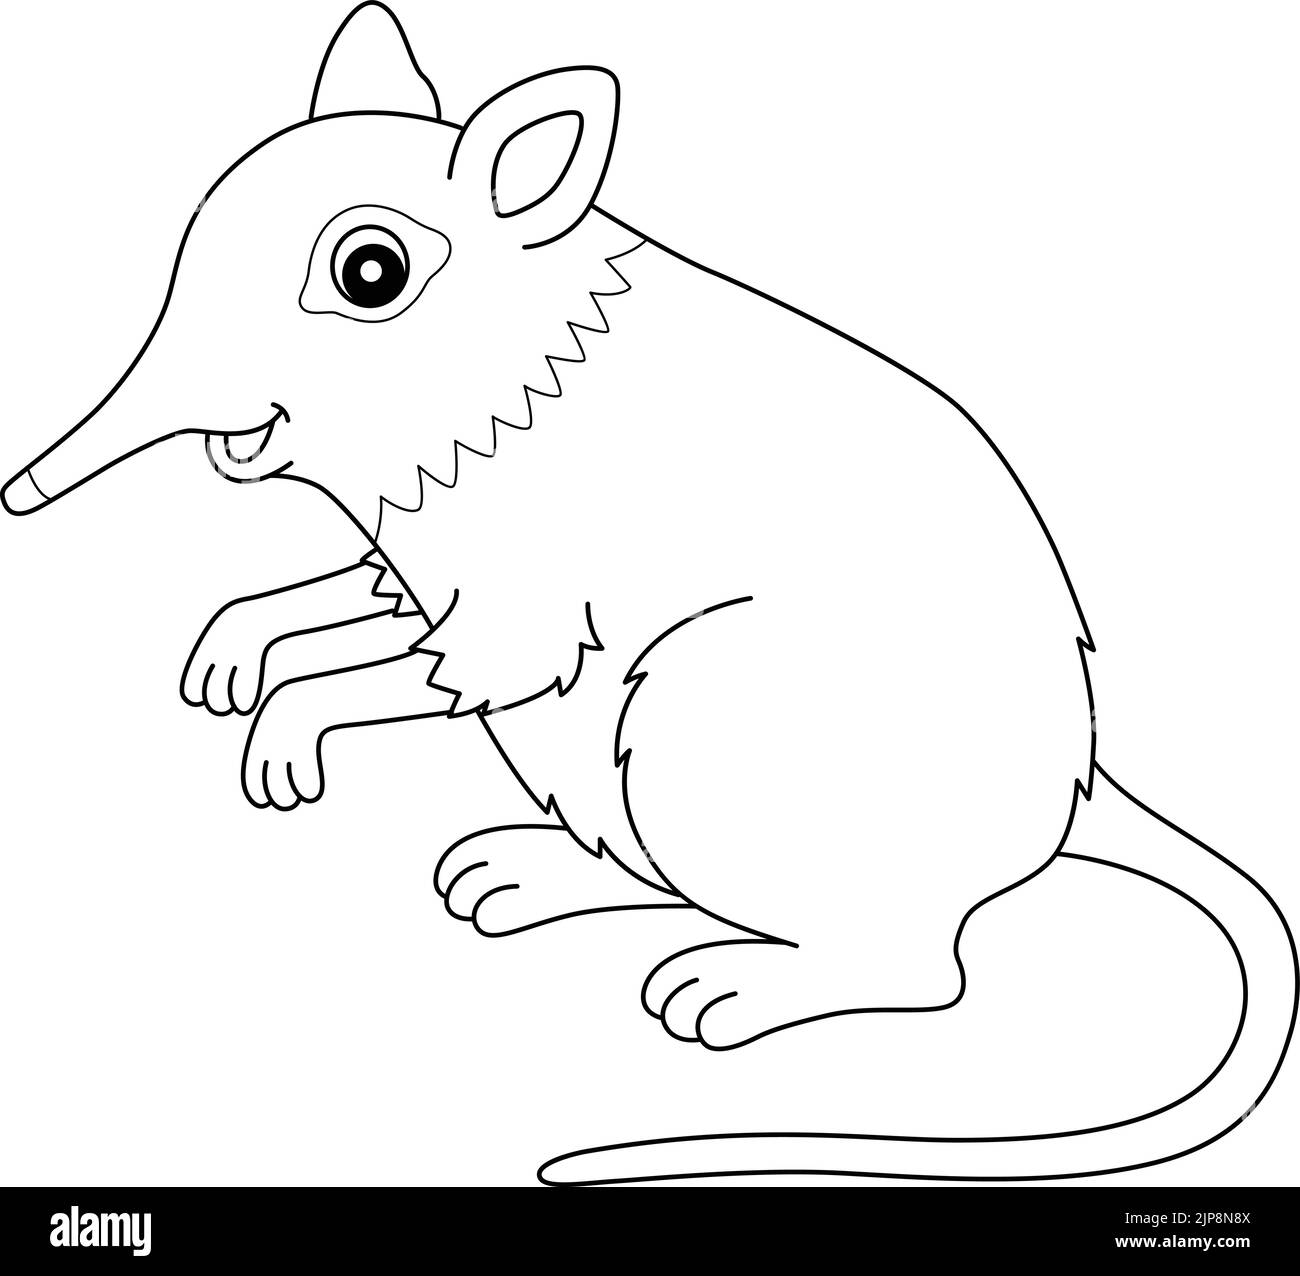 Elephant Shrew Animal Isolated Coloring Page Stock Vector